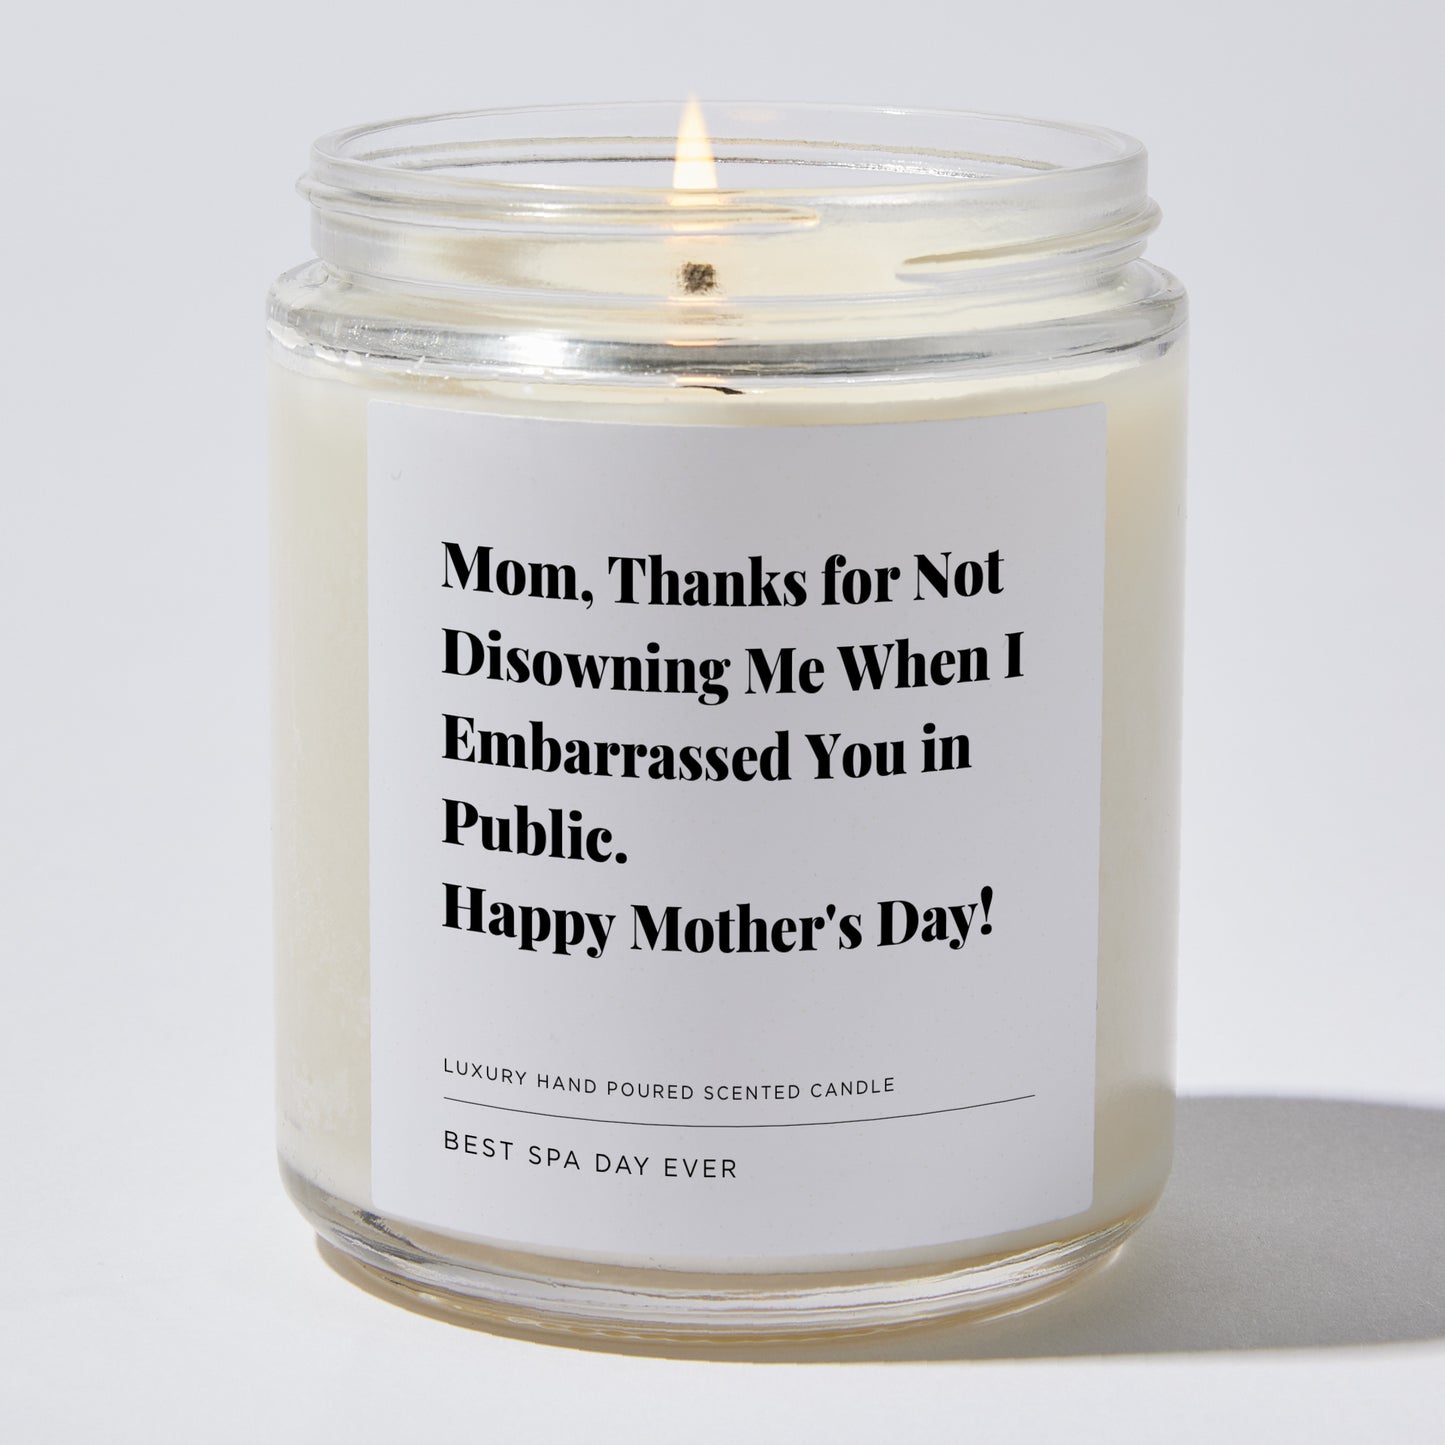 Gift for Mom - Mom, thanks for not disowning me when I embarrassed you in public. Happy Mother's Day! - Candle